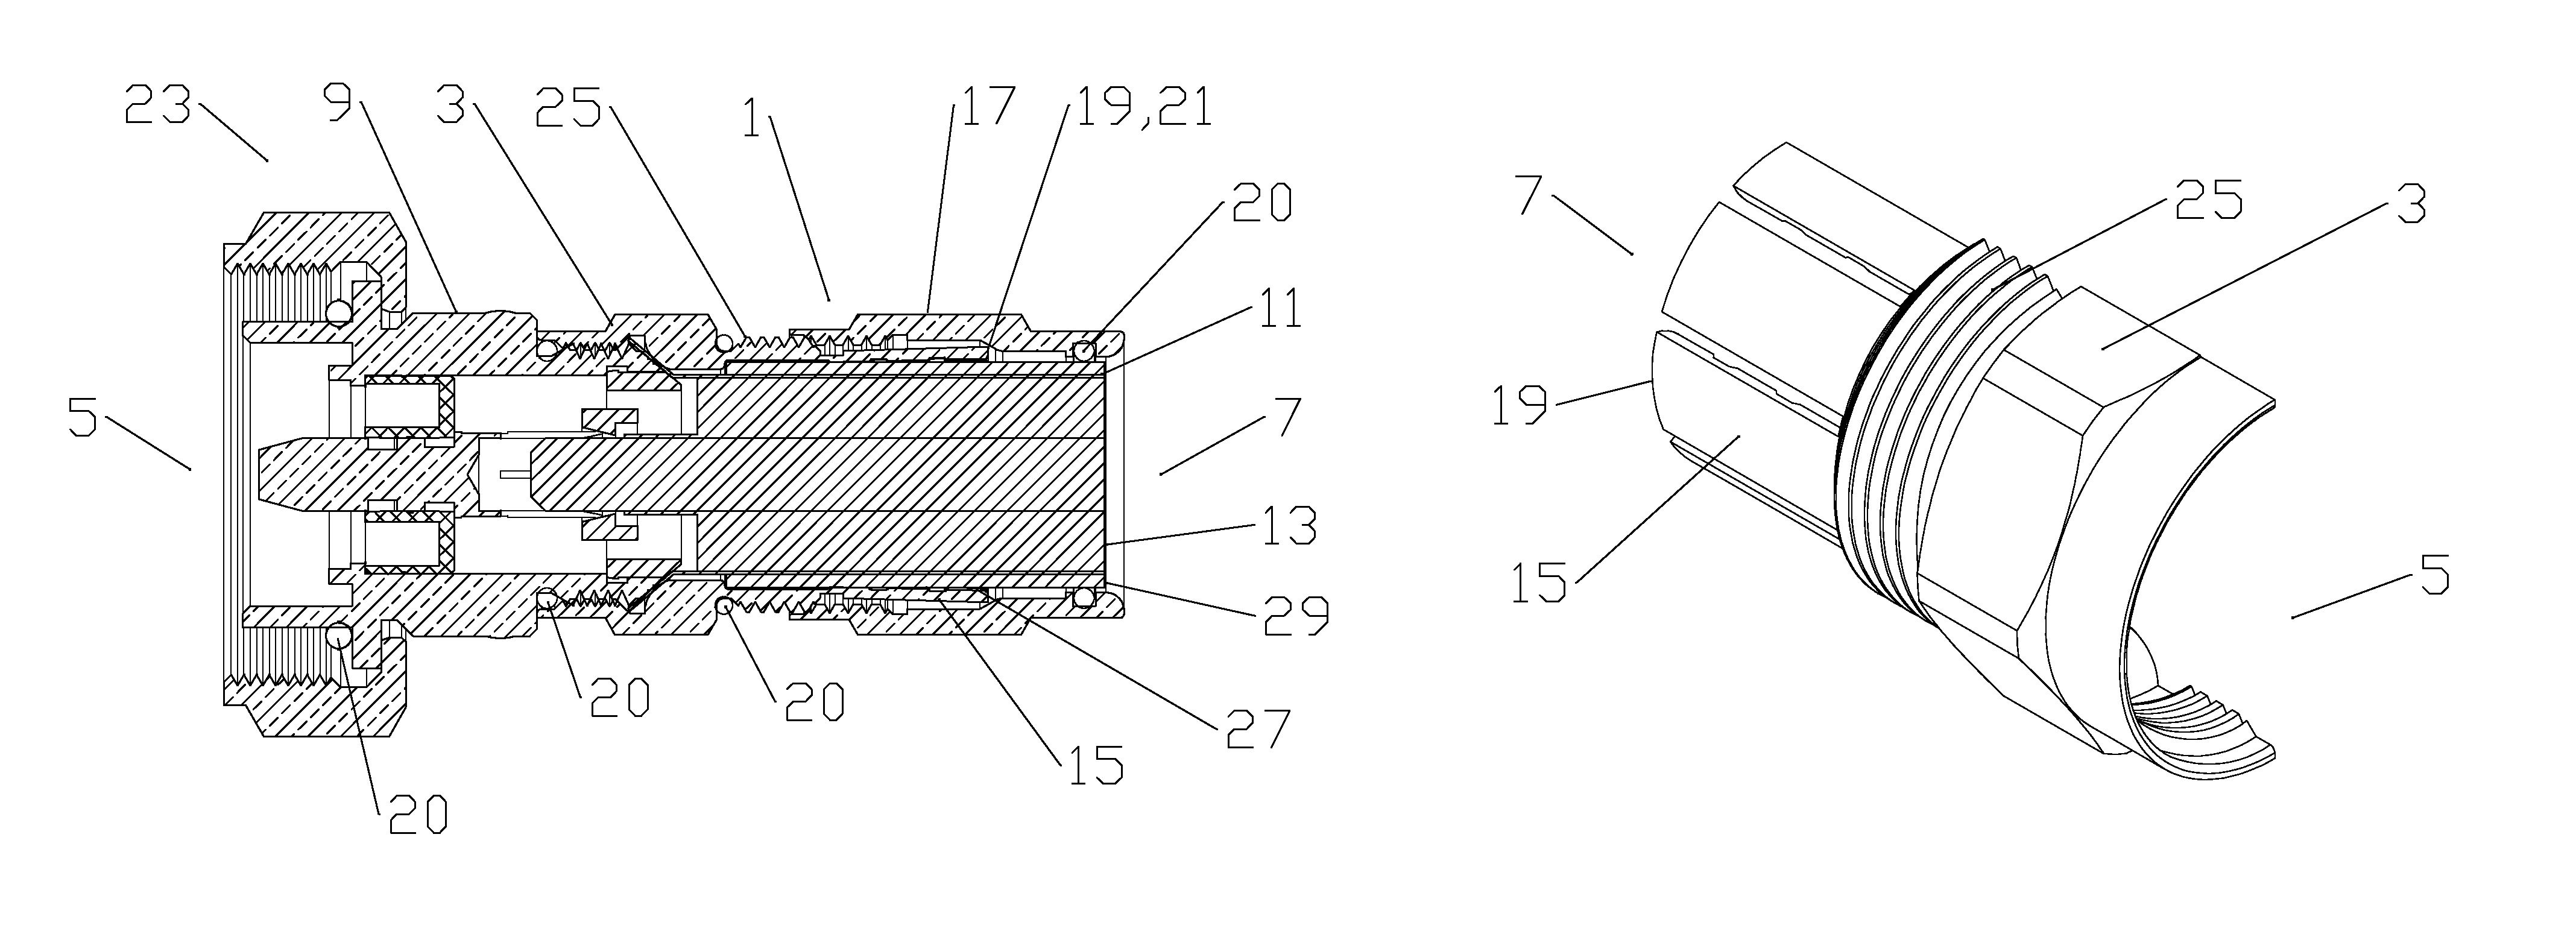 Coaxial connector with a coupling body with grip fingers engaging a wedge of a stabilizing body